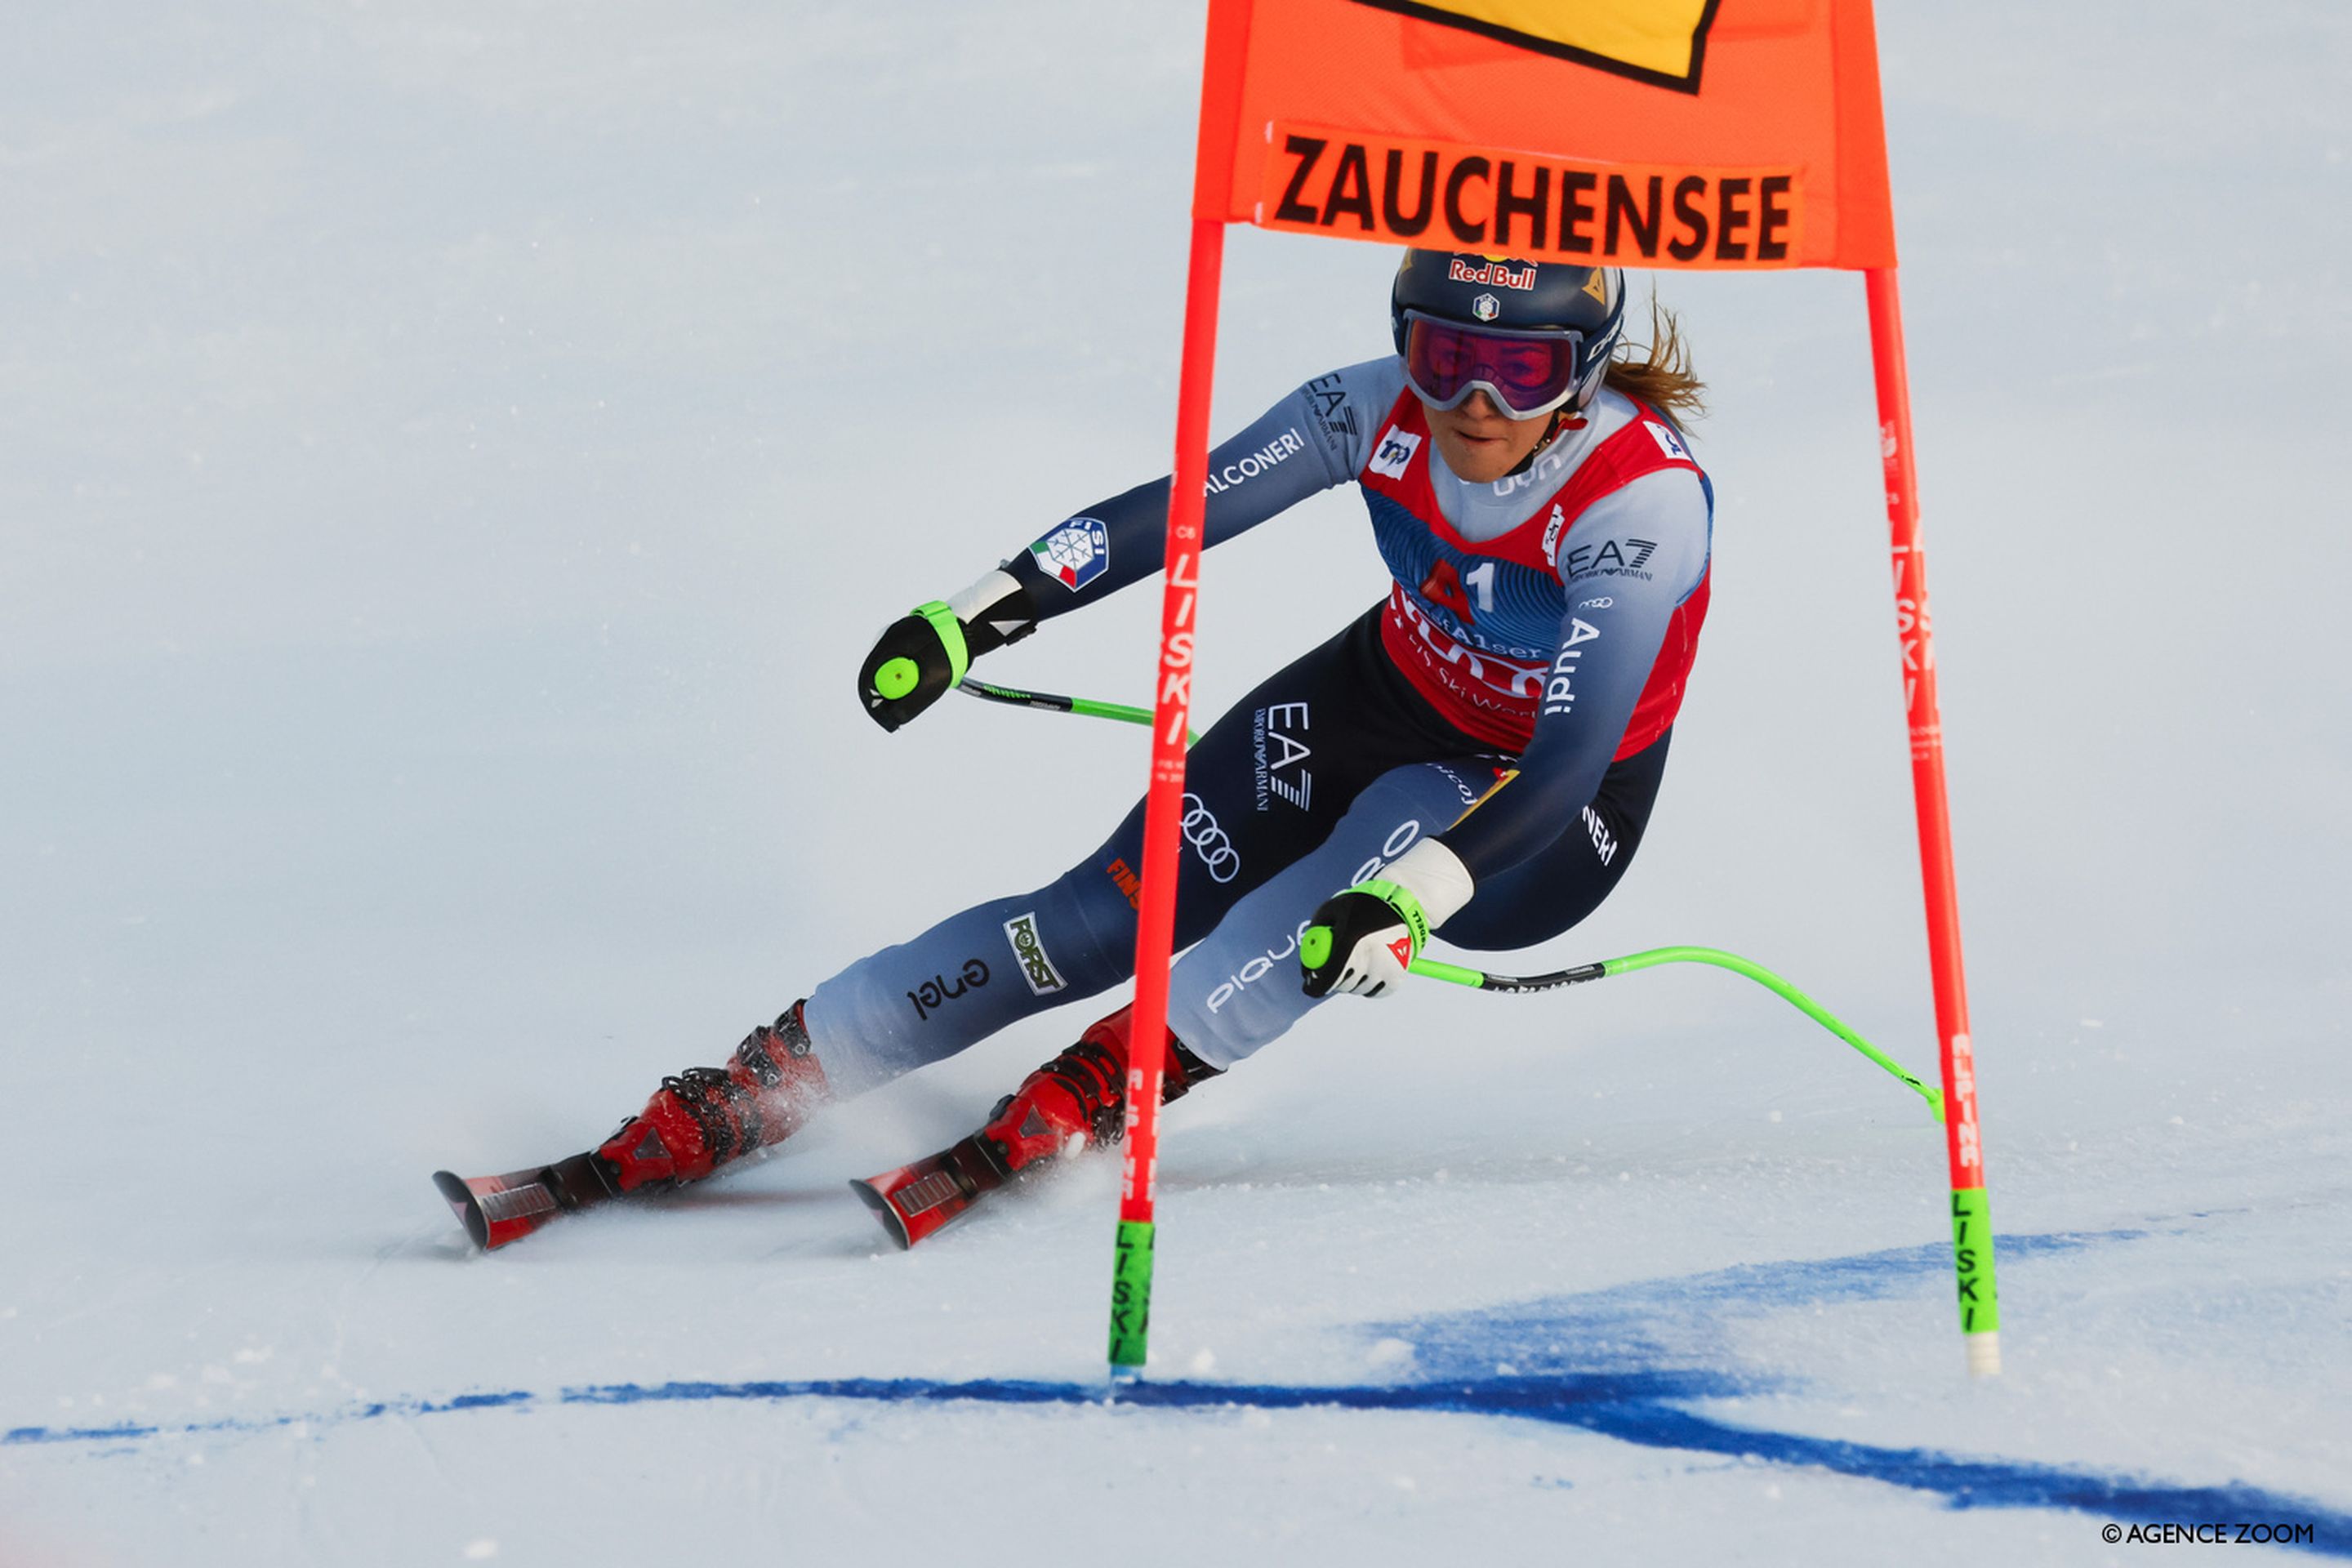 Sofia Goggia (ITA) attacks the downhill course on her way to victory (Agence Zoom)